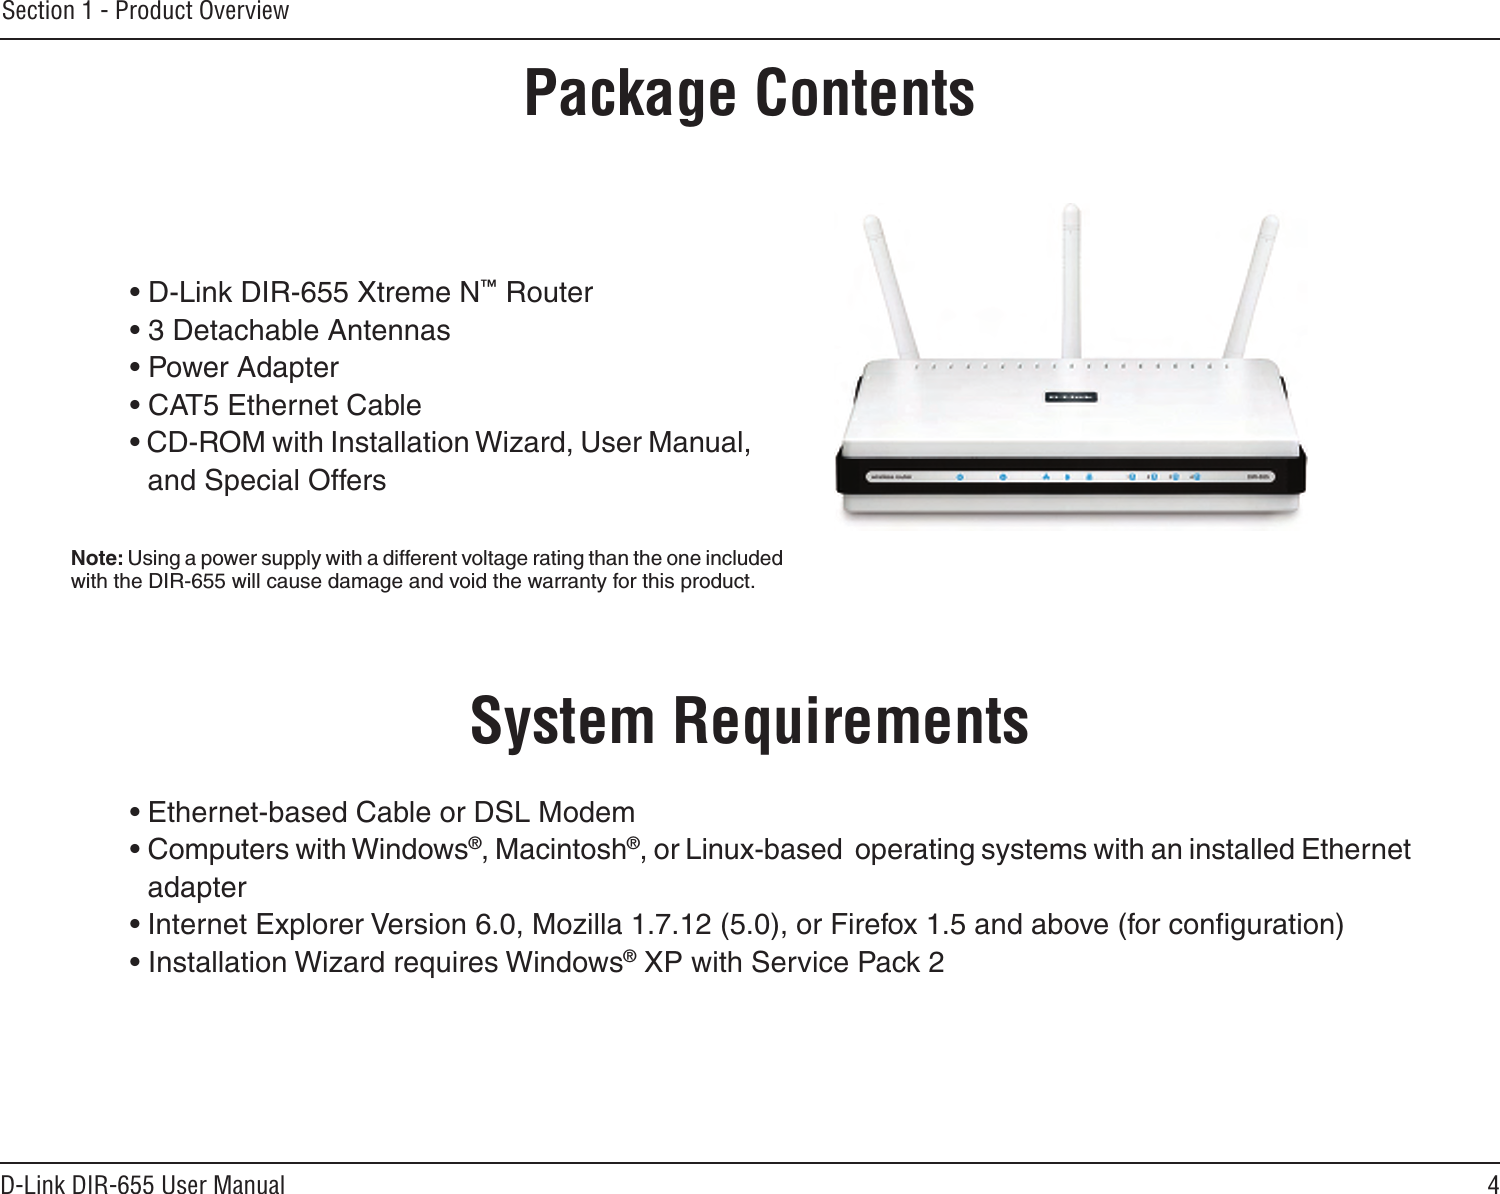 4D-Link DIR-655 User ManualSection 1 - Product Overview• D-Link DIR-655 Xtreme N™ Router• 3 Detachable Antennas• Power Adapter• CAT5 Ethernet Cable• CD-ROM with Installation Wizard, User Manual, and Special OffersSystem Requirements• Ethernet-based Cable or DSL Modem• Computers with Windows®, Macintosh®, or Linux-based  operating systems with an installed Ethernet adapter• Internet Explorer Version 6.0, Mozilla 1.7.12 (5.0), or Firefox 1.5 and above (for conﬁguration)• Installation Wizard requires Windows® XP with Service Pack 2Product OverviewPackage ContentsNote: Using a power supply with a different voltage rating than the one included with the DIR-655 will cause damage and void the warranty for this product.